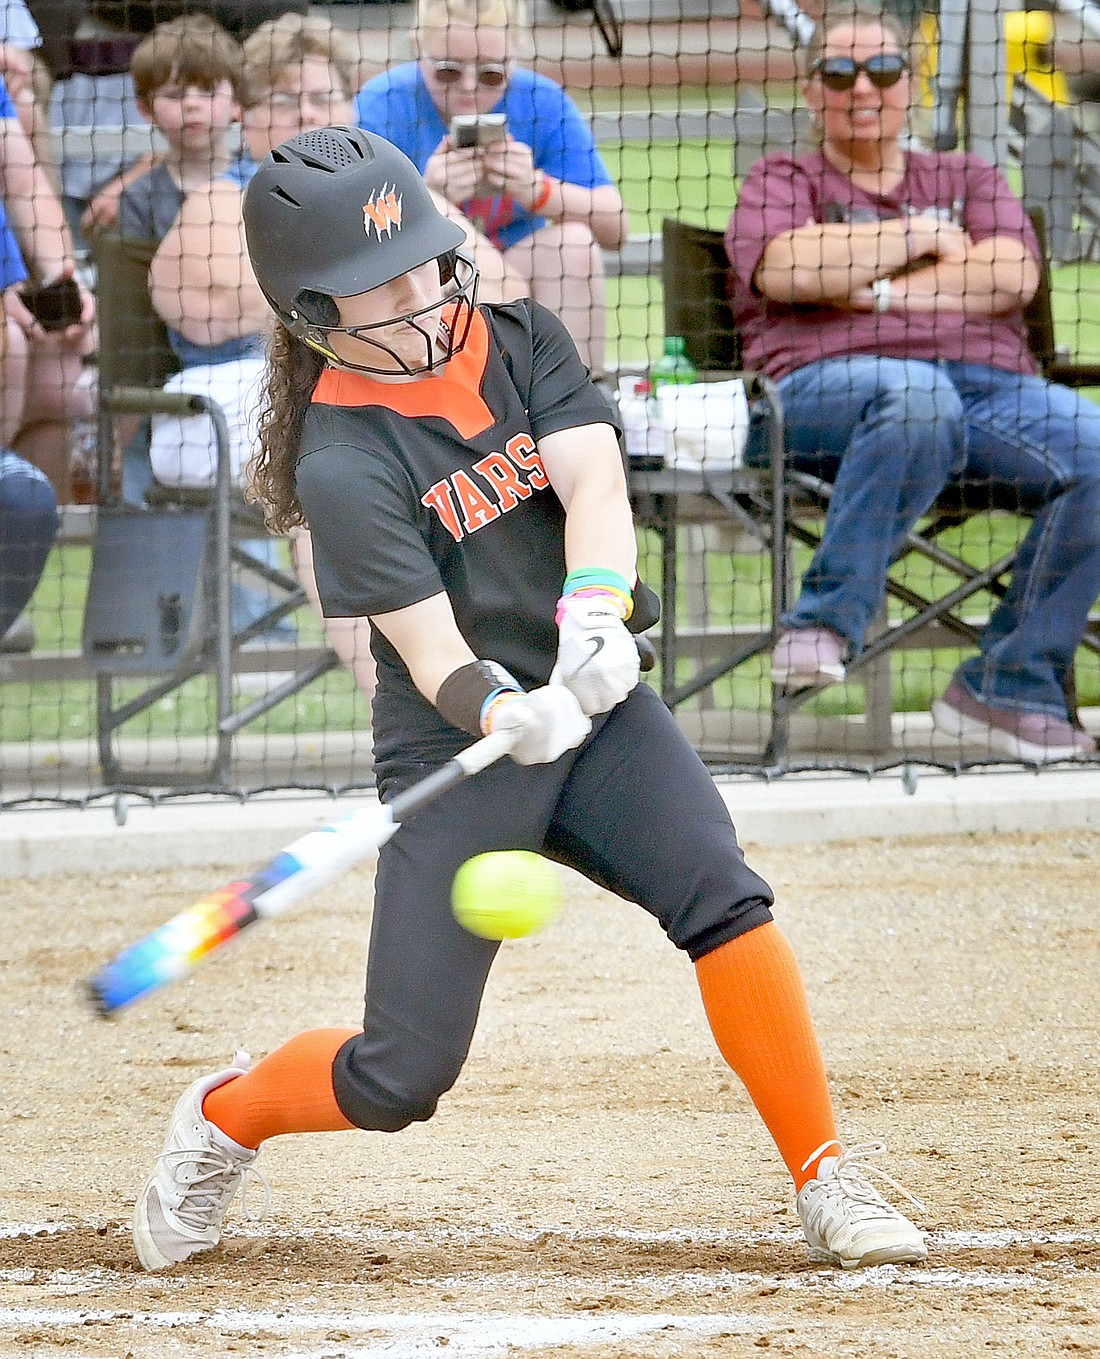 Freshman Addyson Sainer of Warsaw meets up with the ball for a hit during the second (?) inning...Nieter